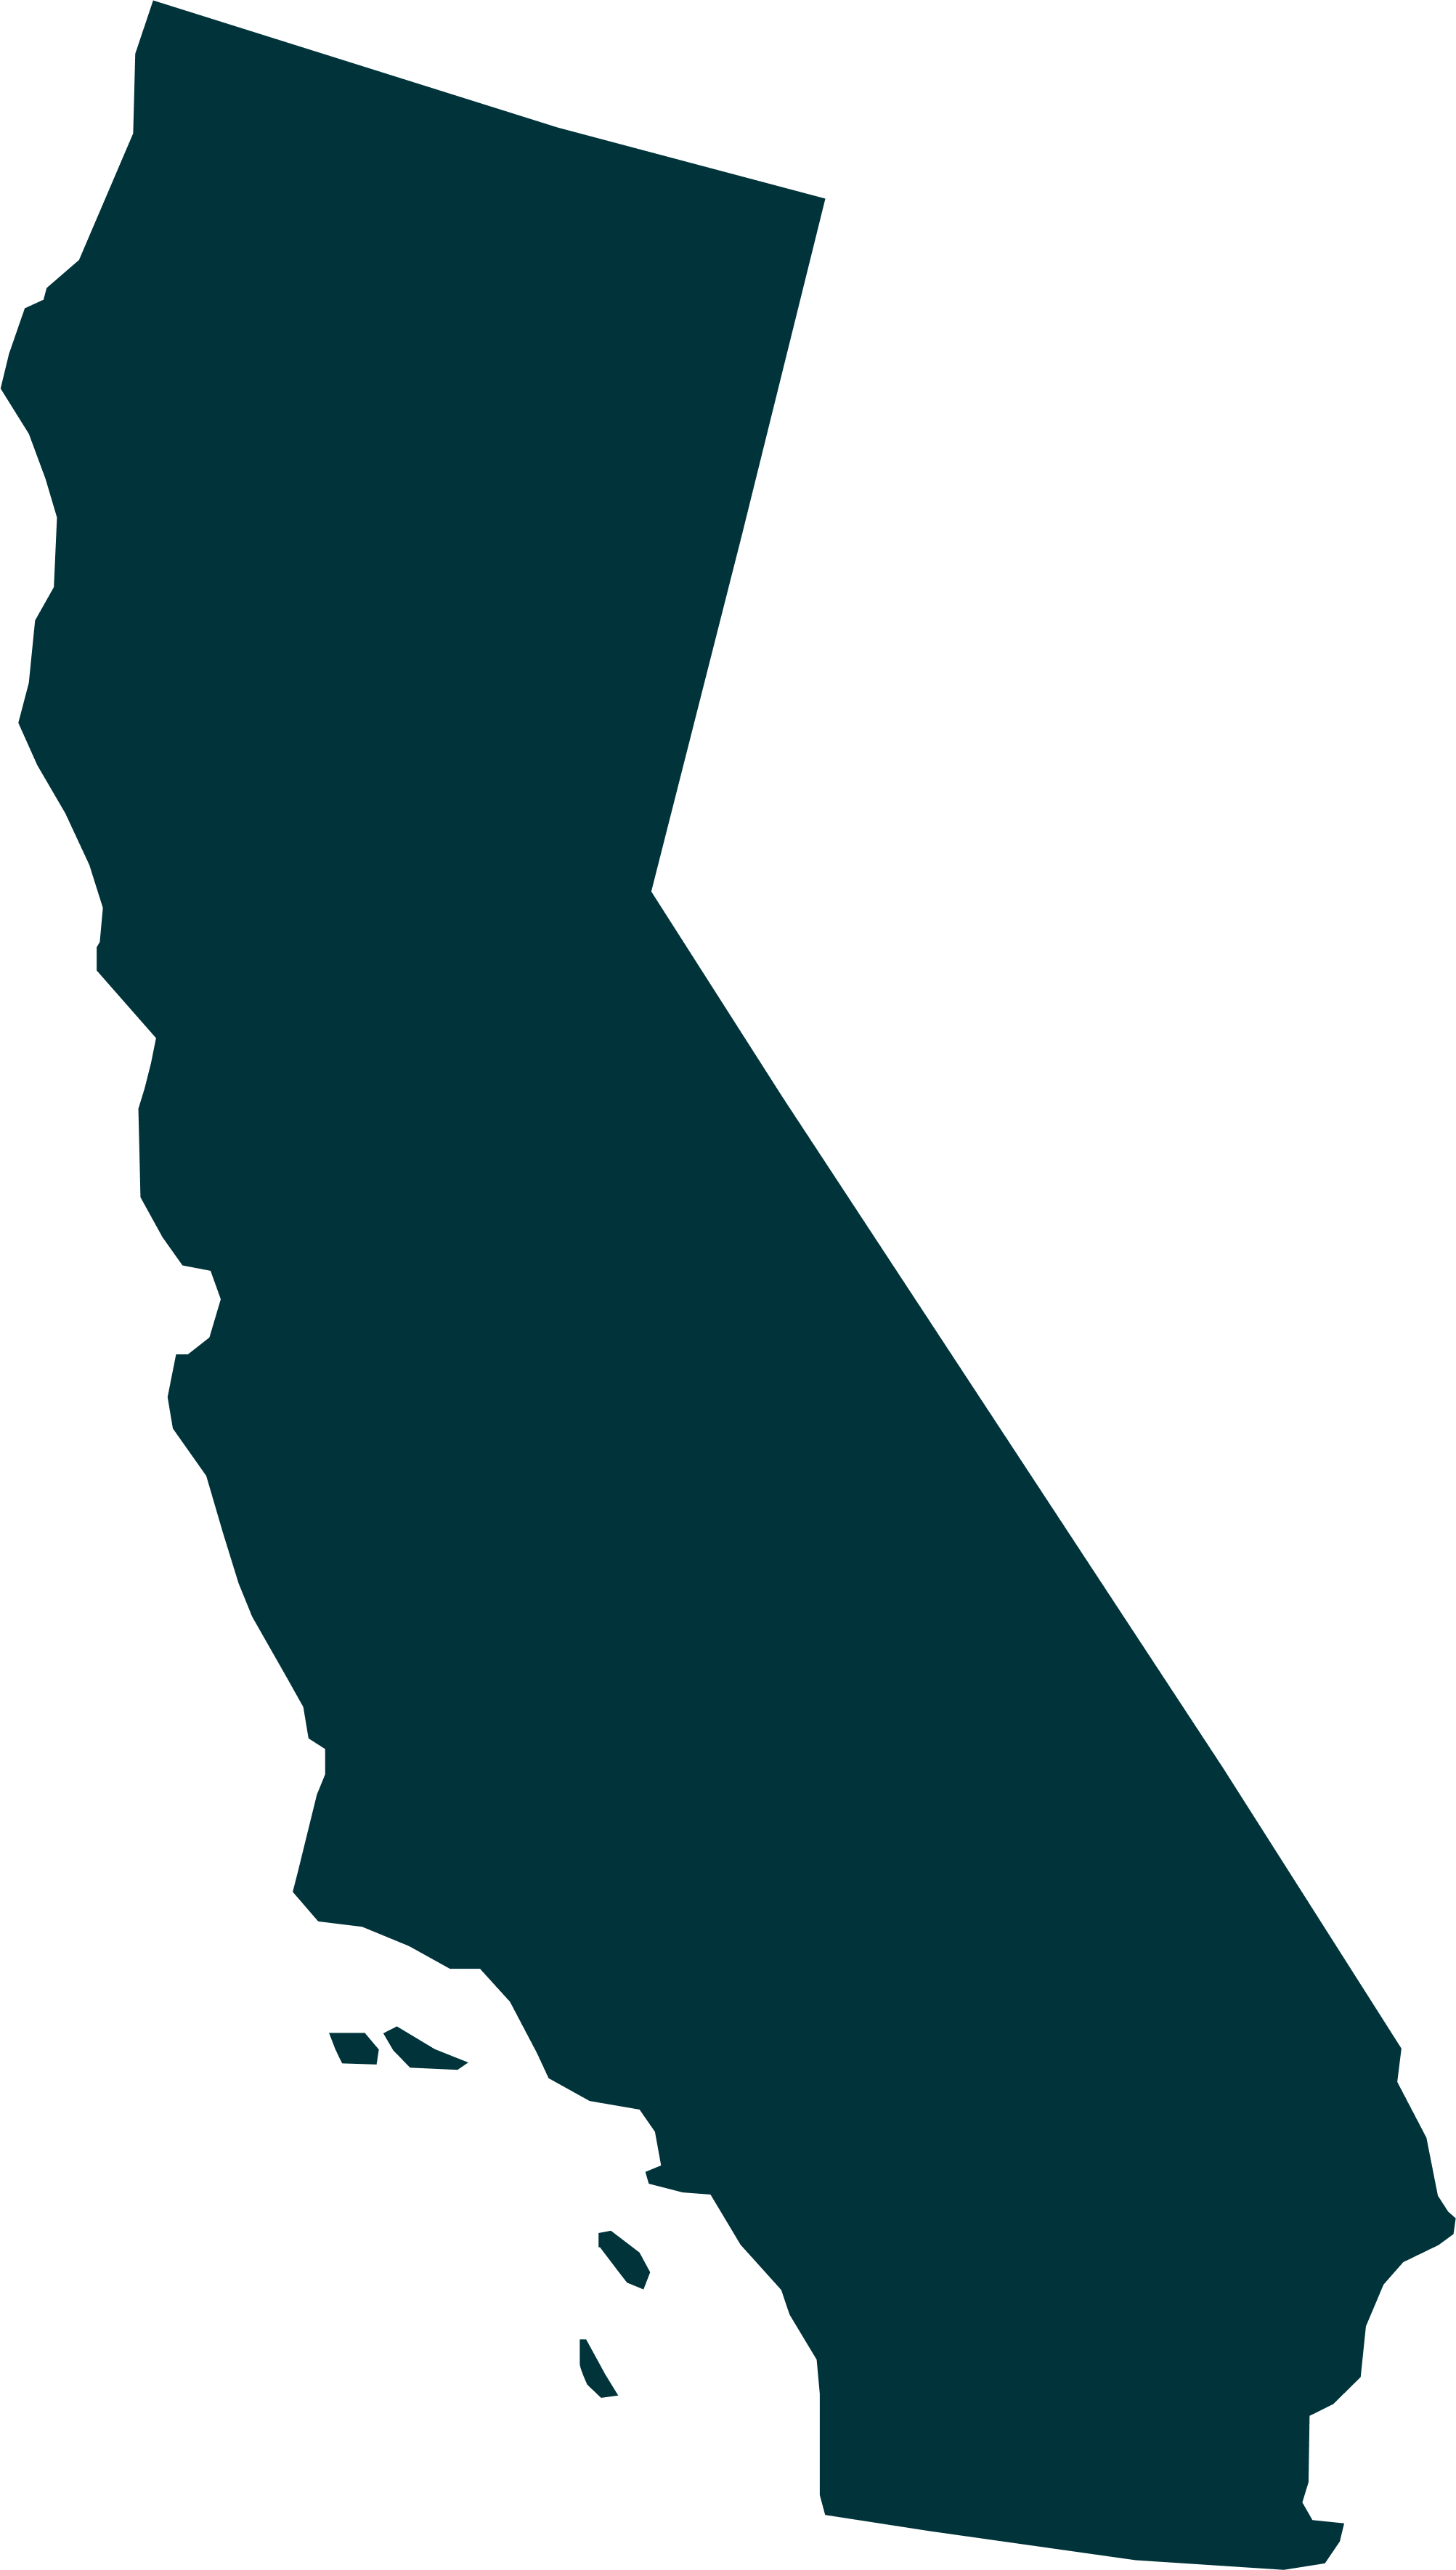 A silhouette of the state of California.